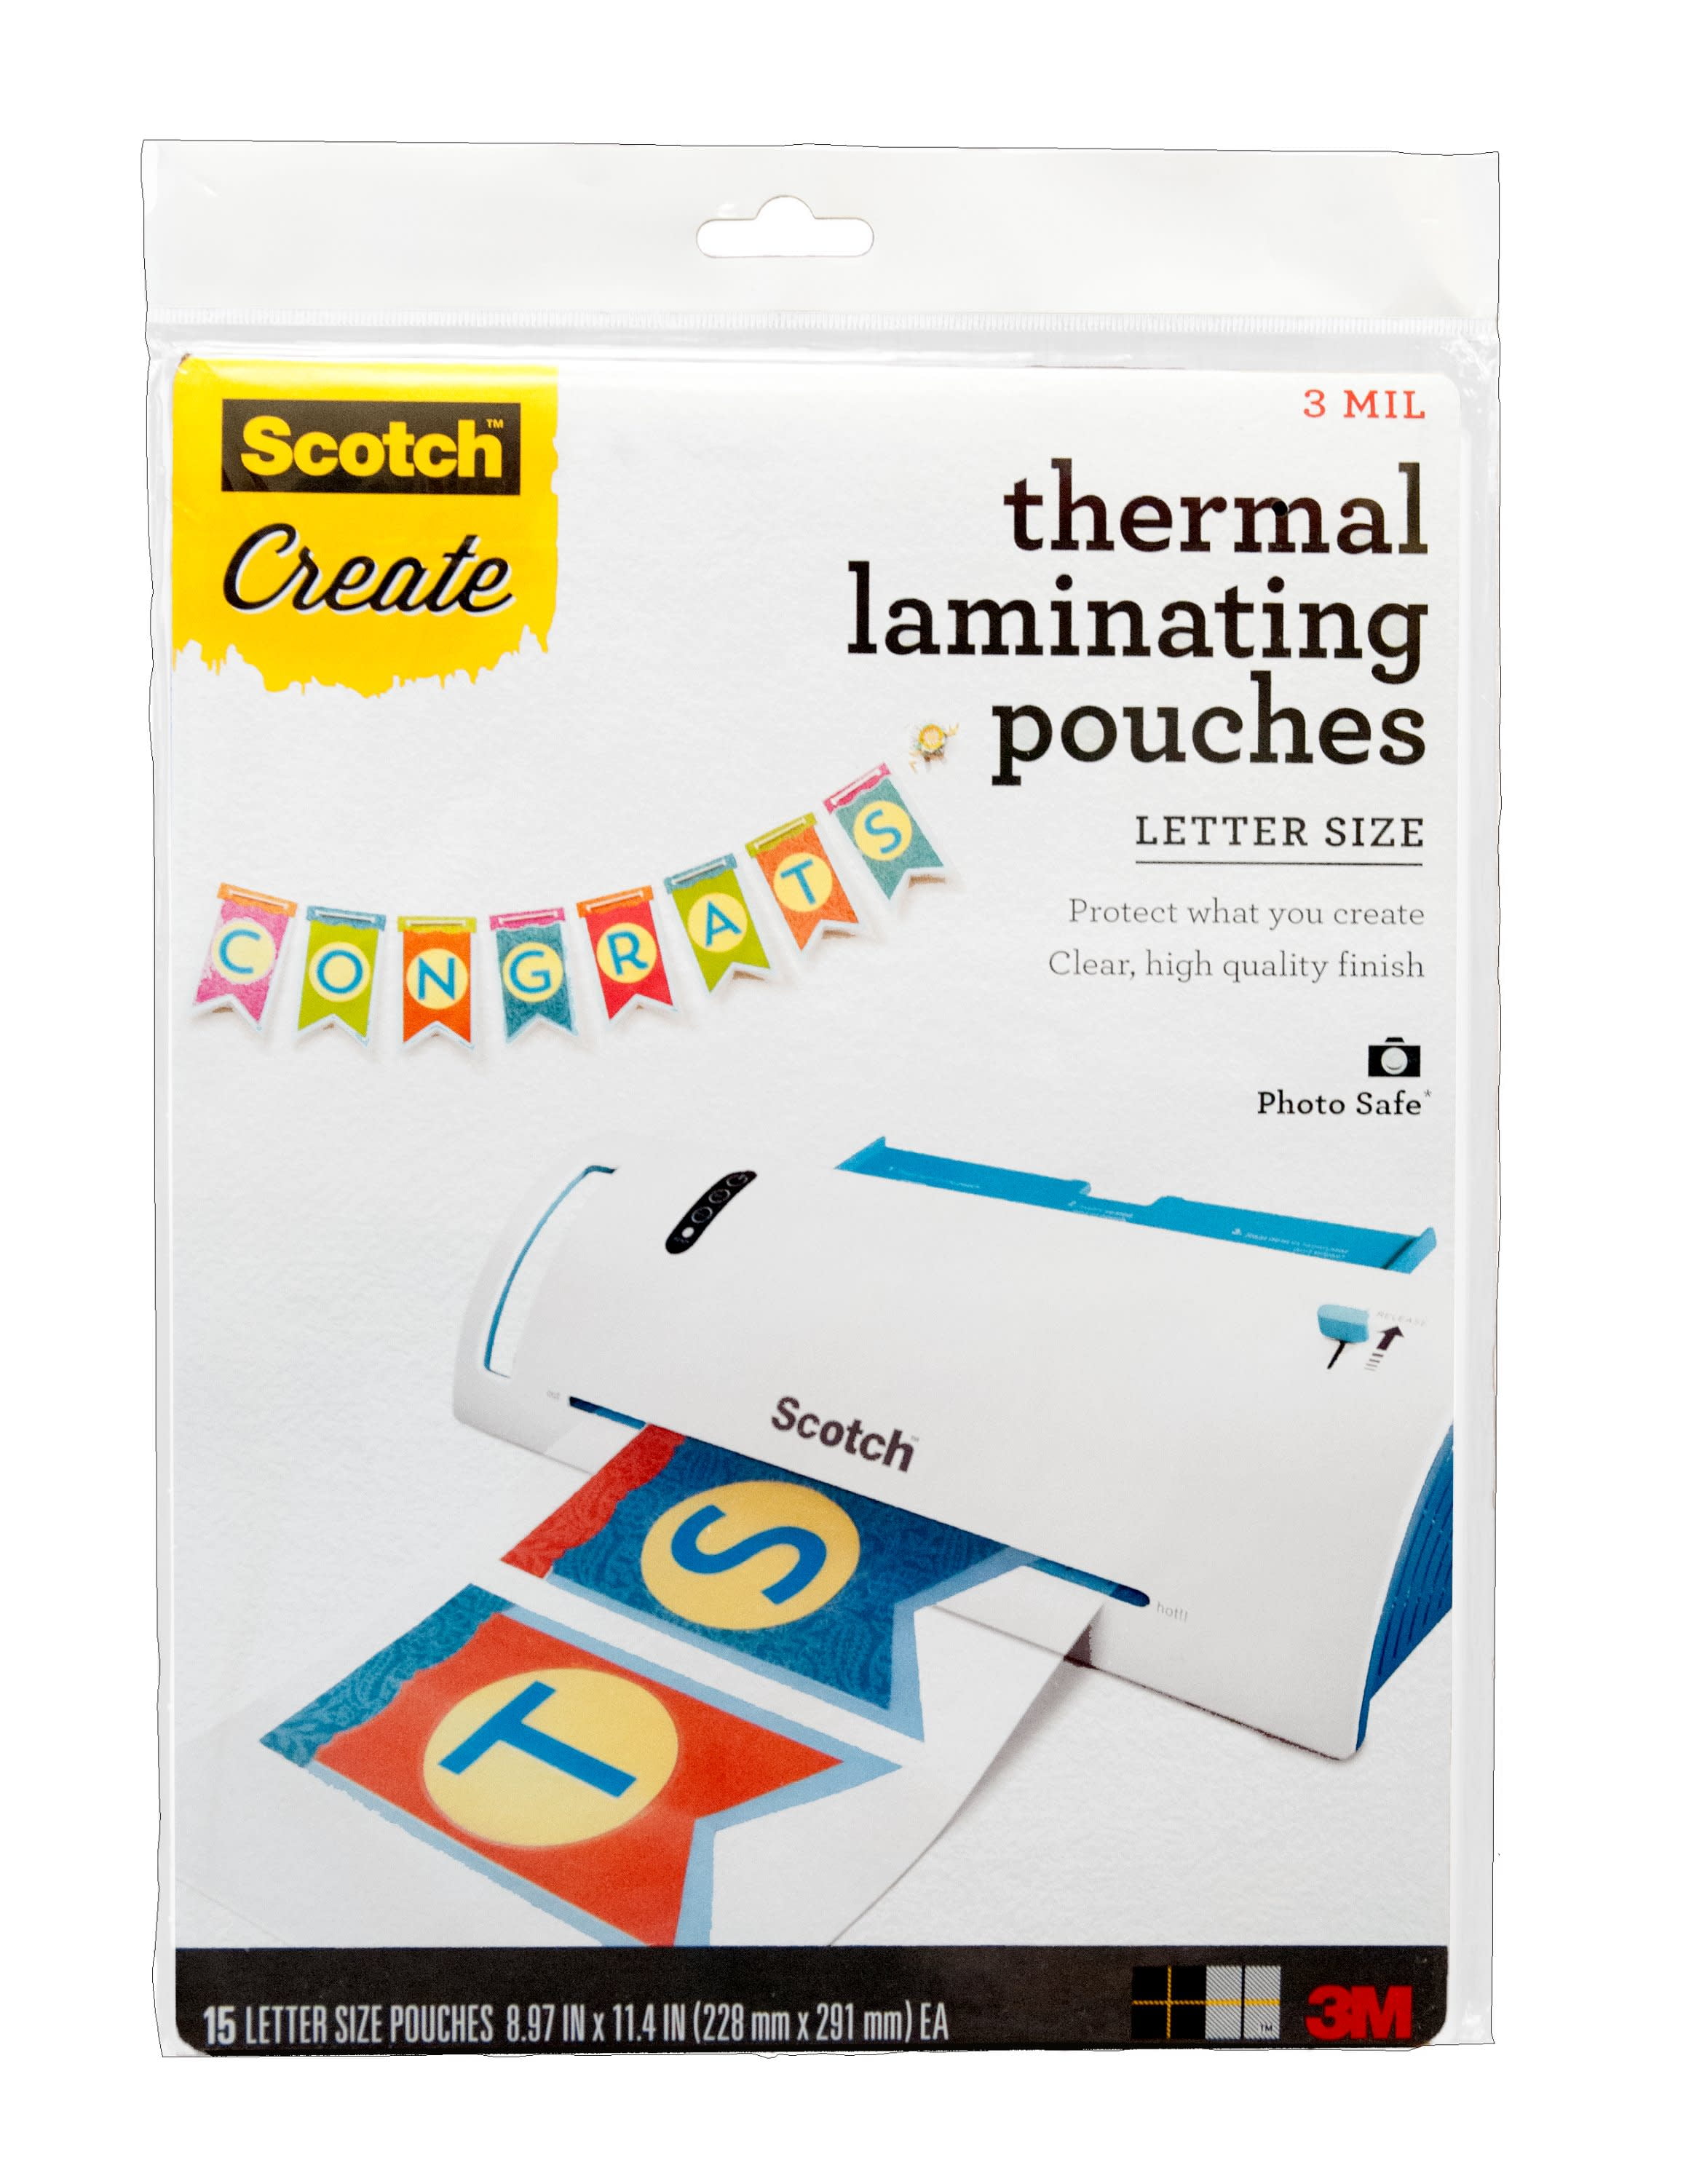 THERMAL LAMINATING POUCHES LETTER SIZE BY SCOTCH CREATE 15 LETTER SIZE POUCHES 